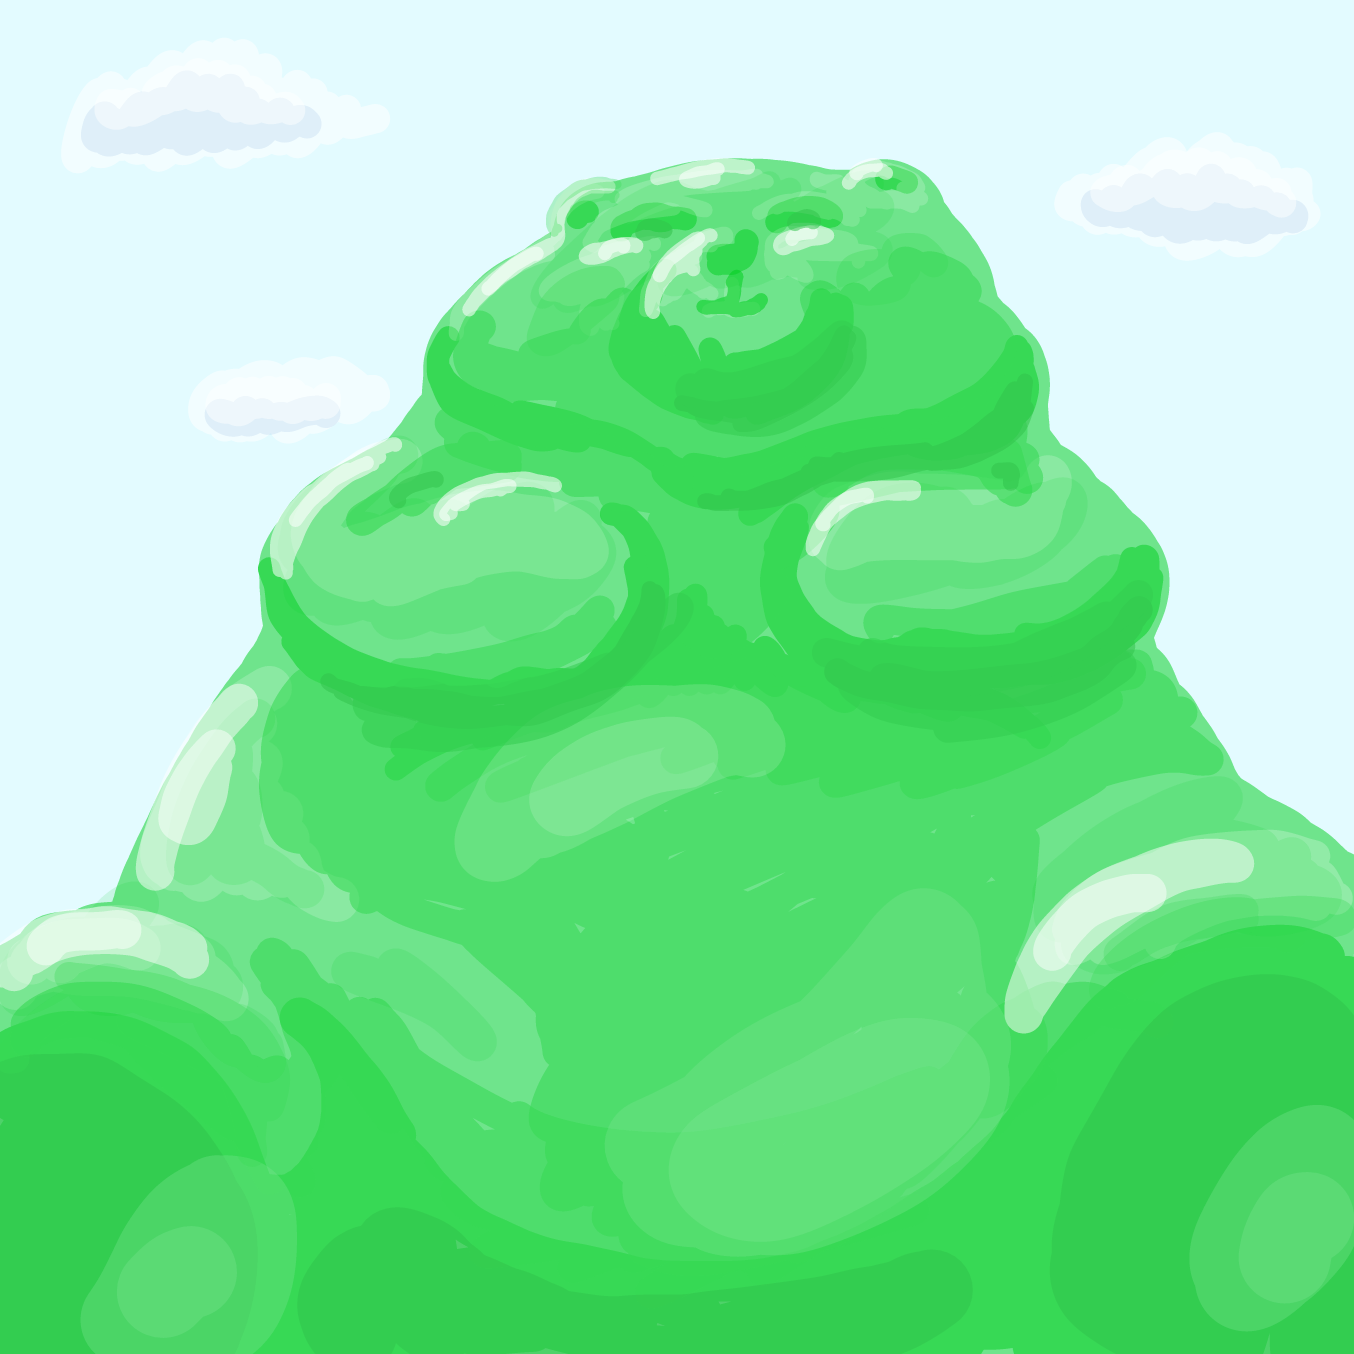 Drawing in Giant Gummi by Wizard Croissant